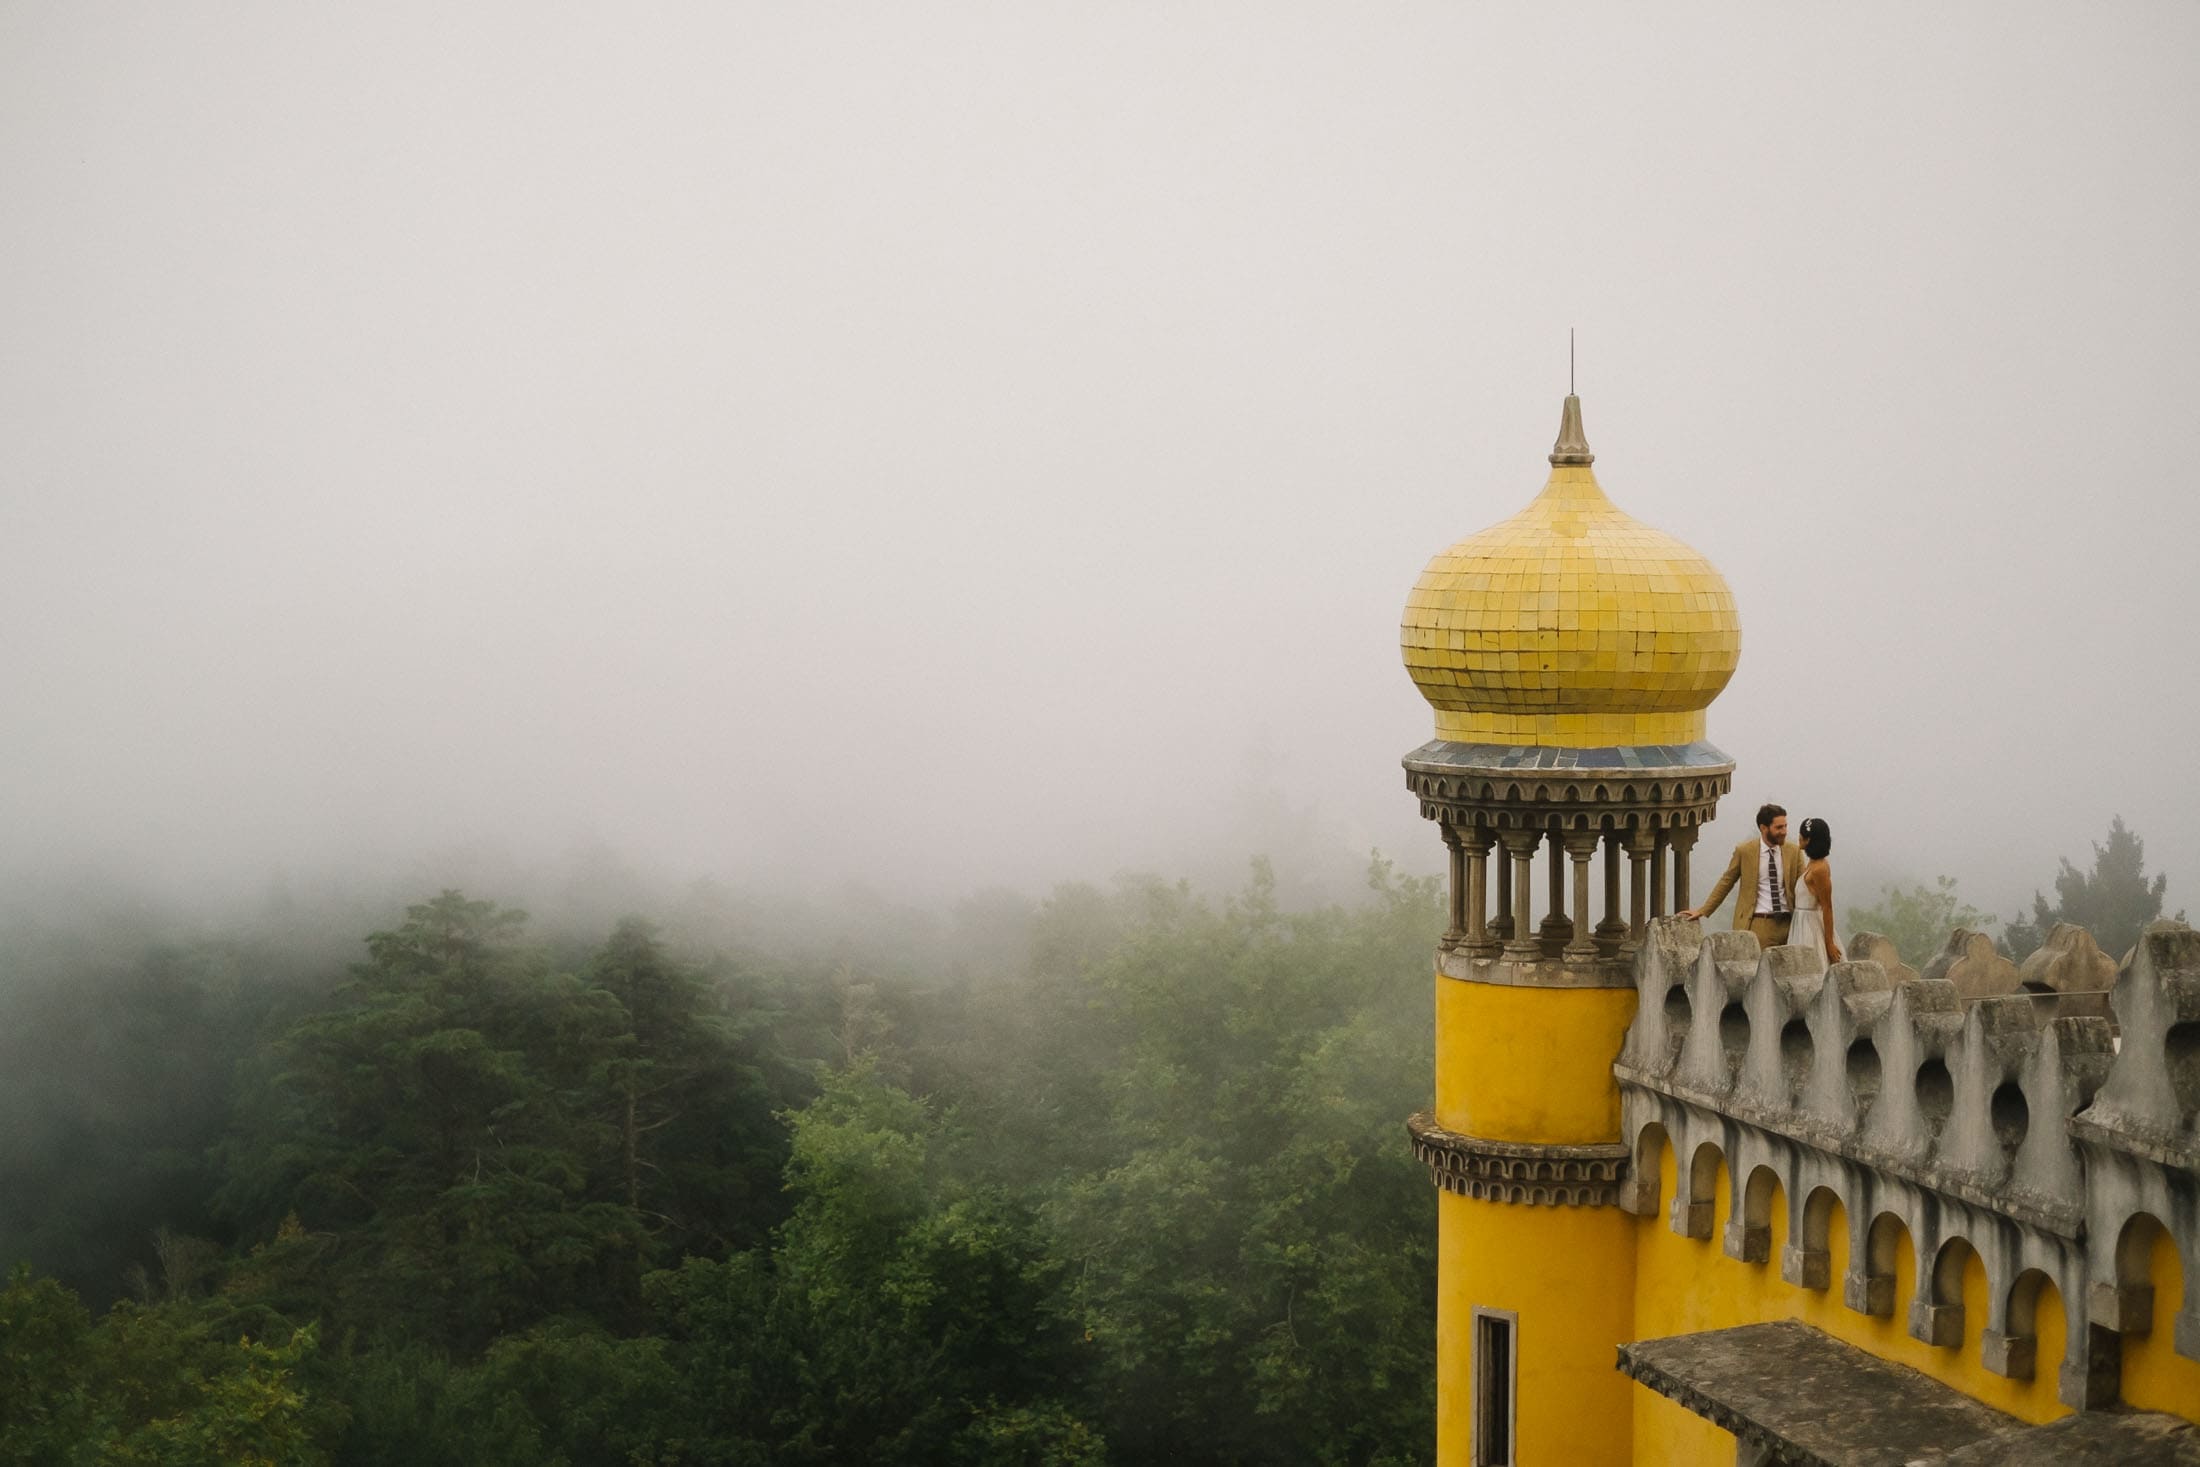 pena palace in rain forest in SIntra #rainforest. #elopement #forestelopement